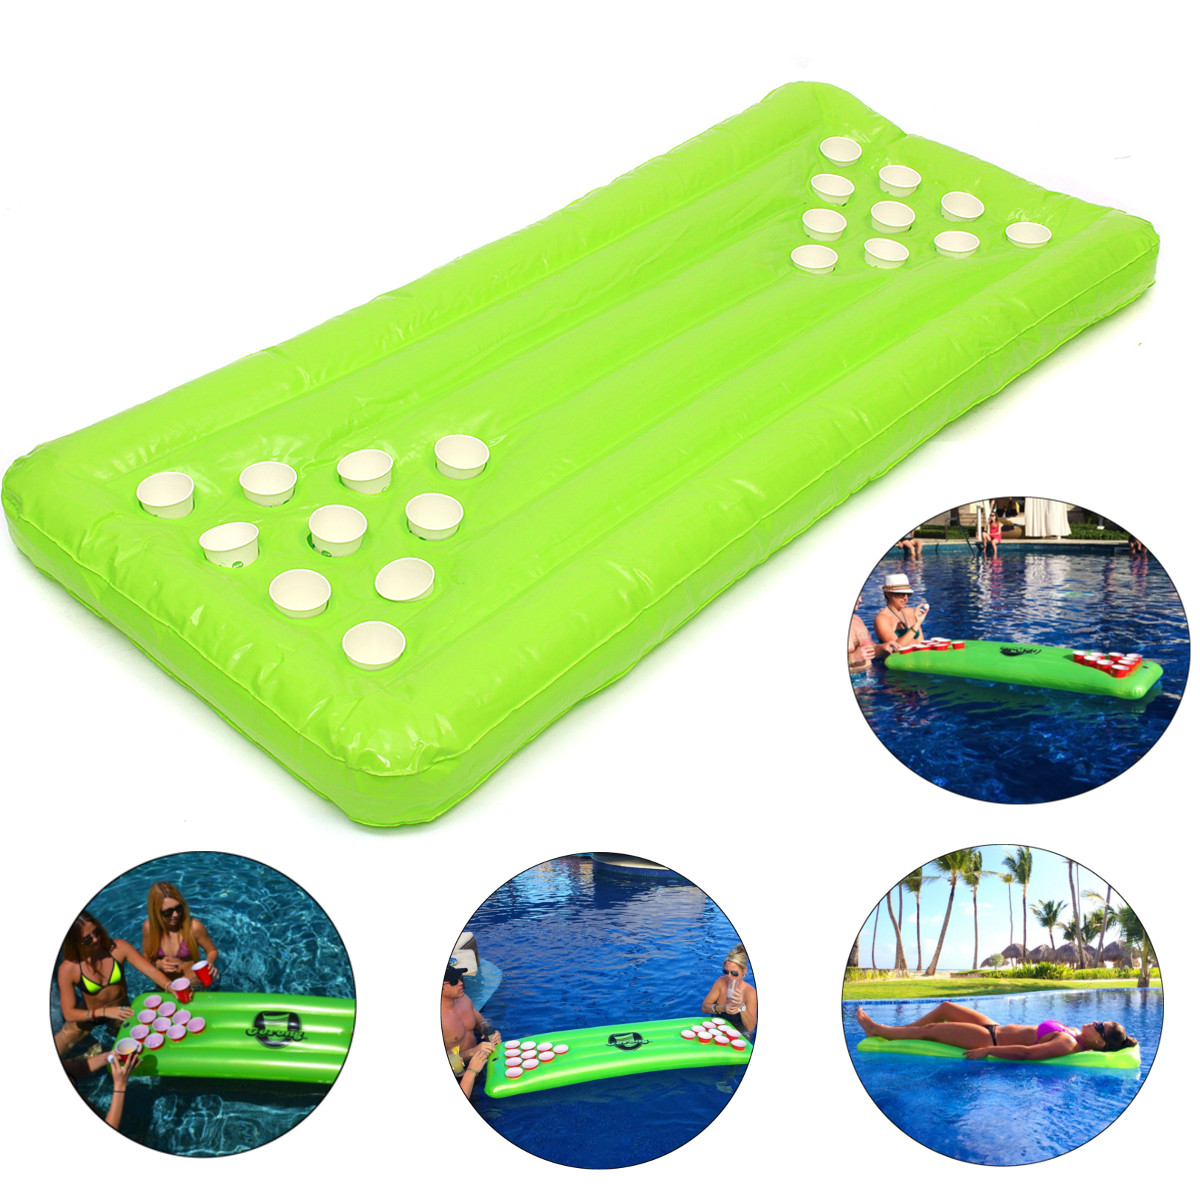 PVC-Inflatable-Beer-Pong-Table-22-Cup-Holes-Water-Floating-For-Pool-Party-Drinking-Game-1231571-1